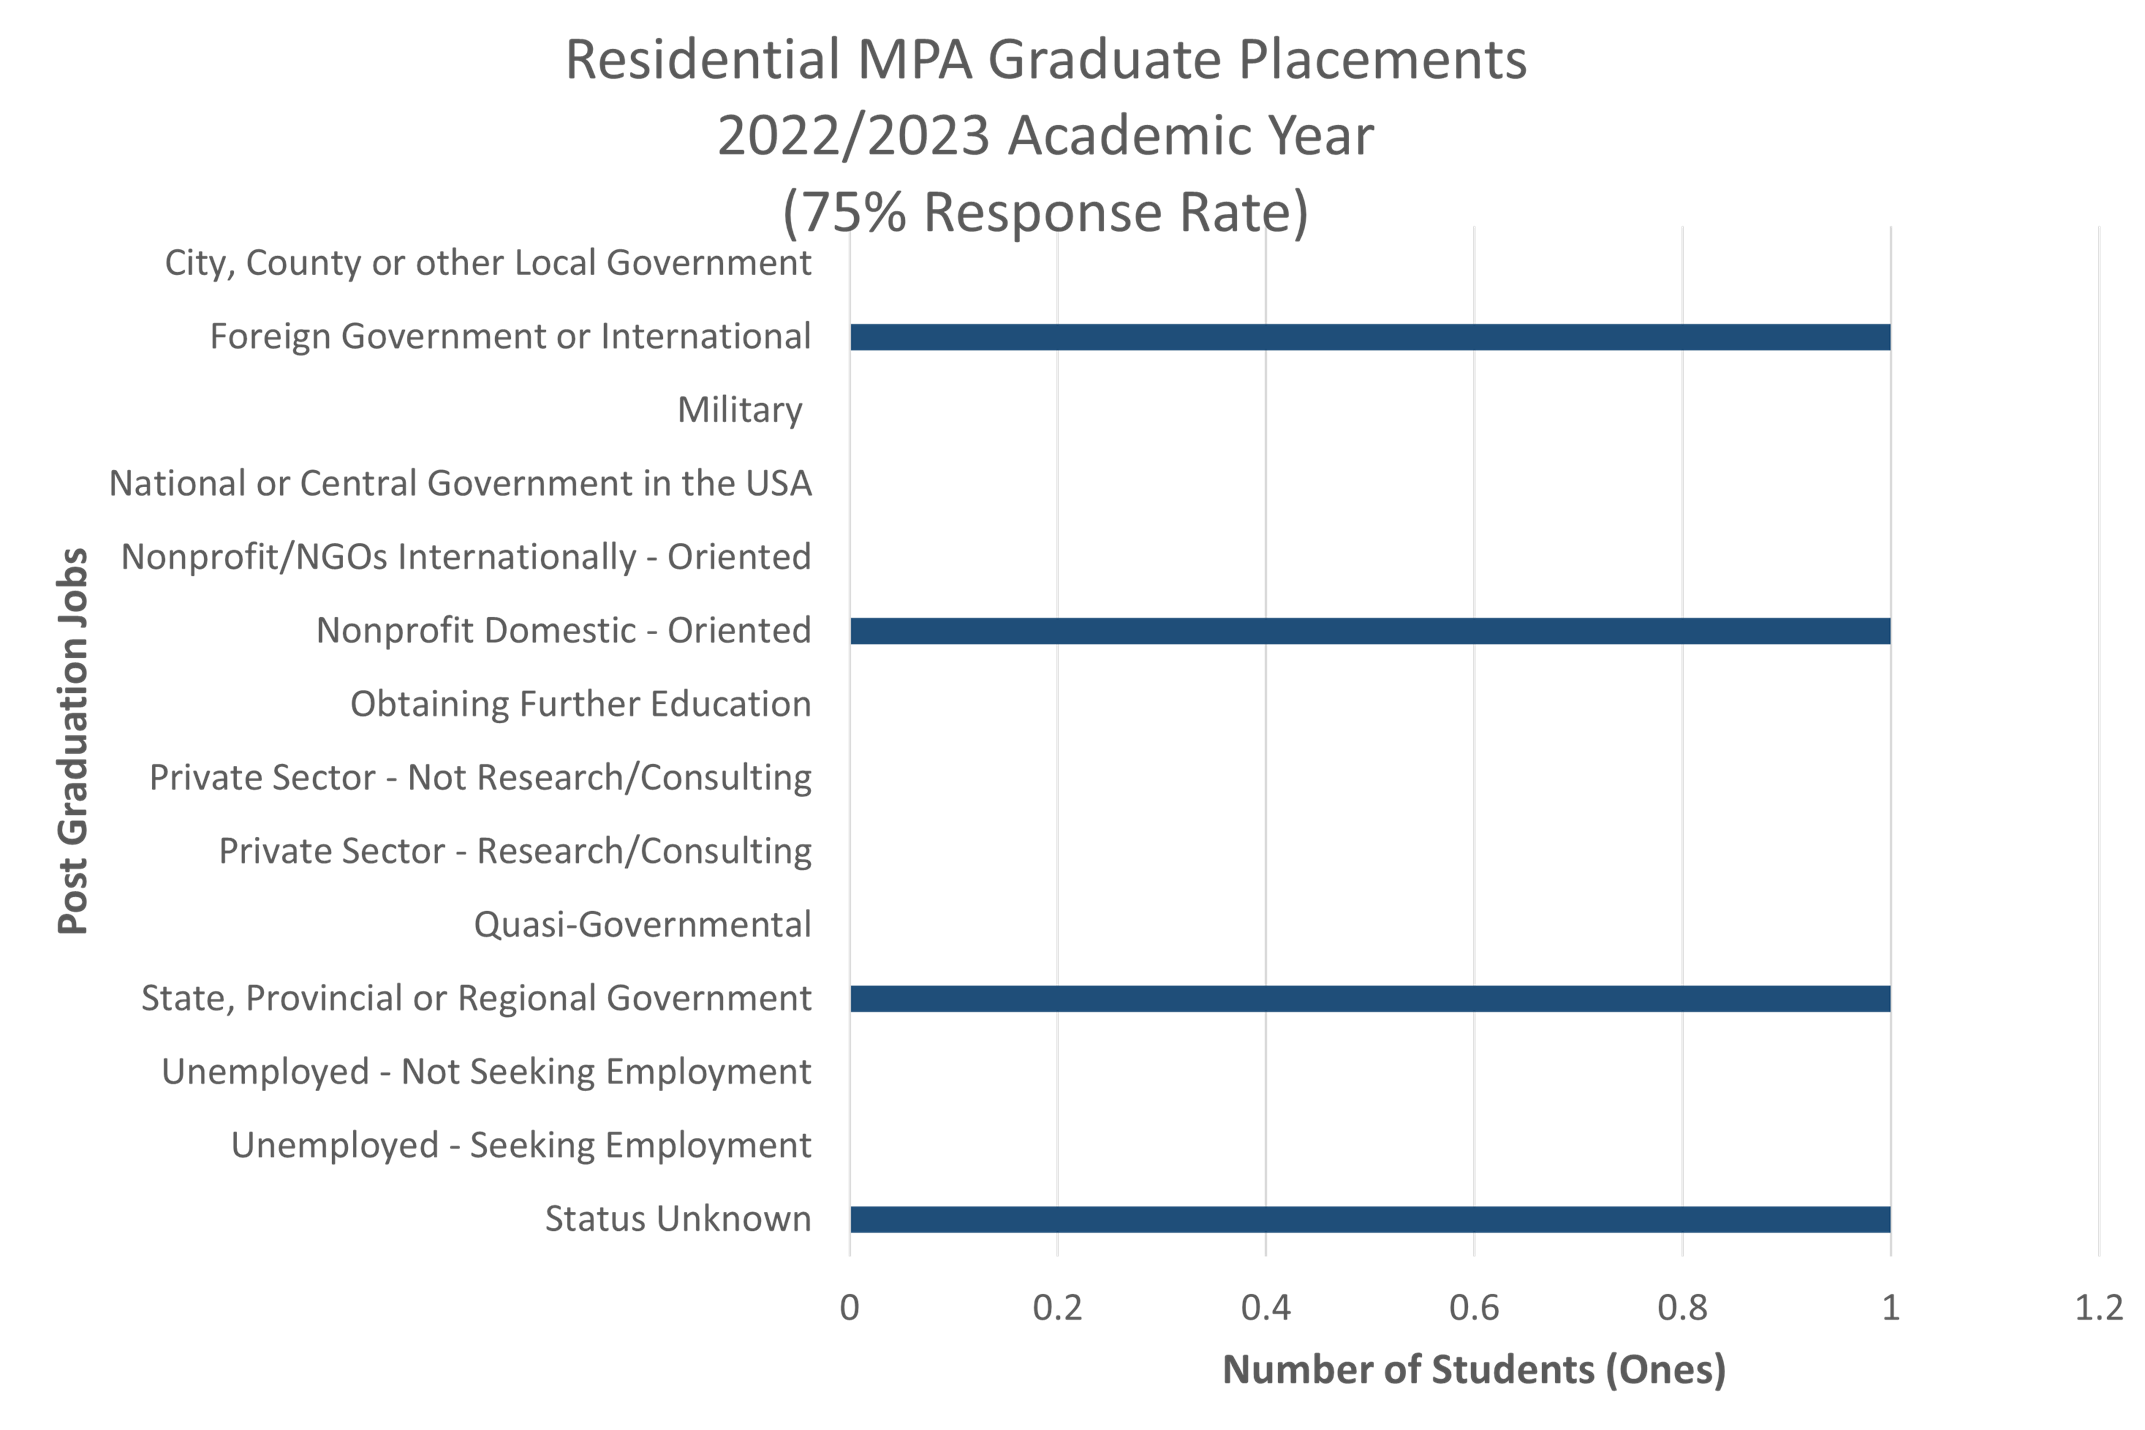 A graph illustrating the residential graduate placements from the Master of Public Administration program, as of 2021-2022